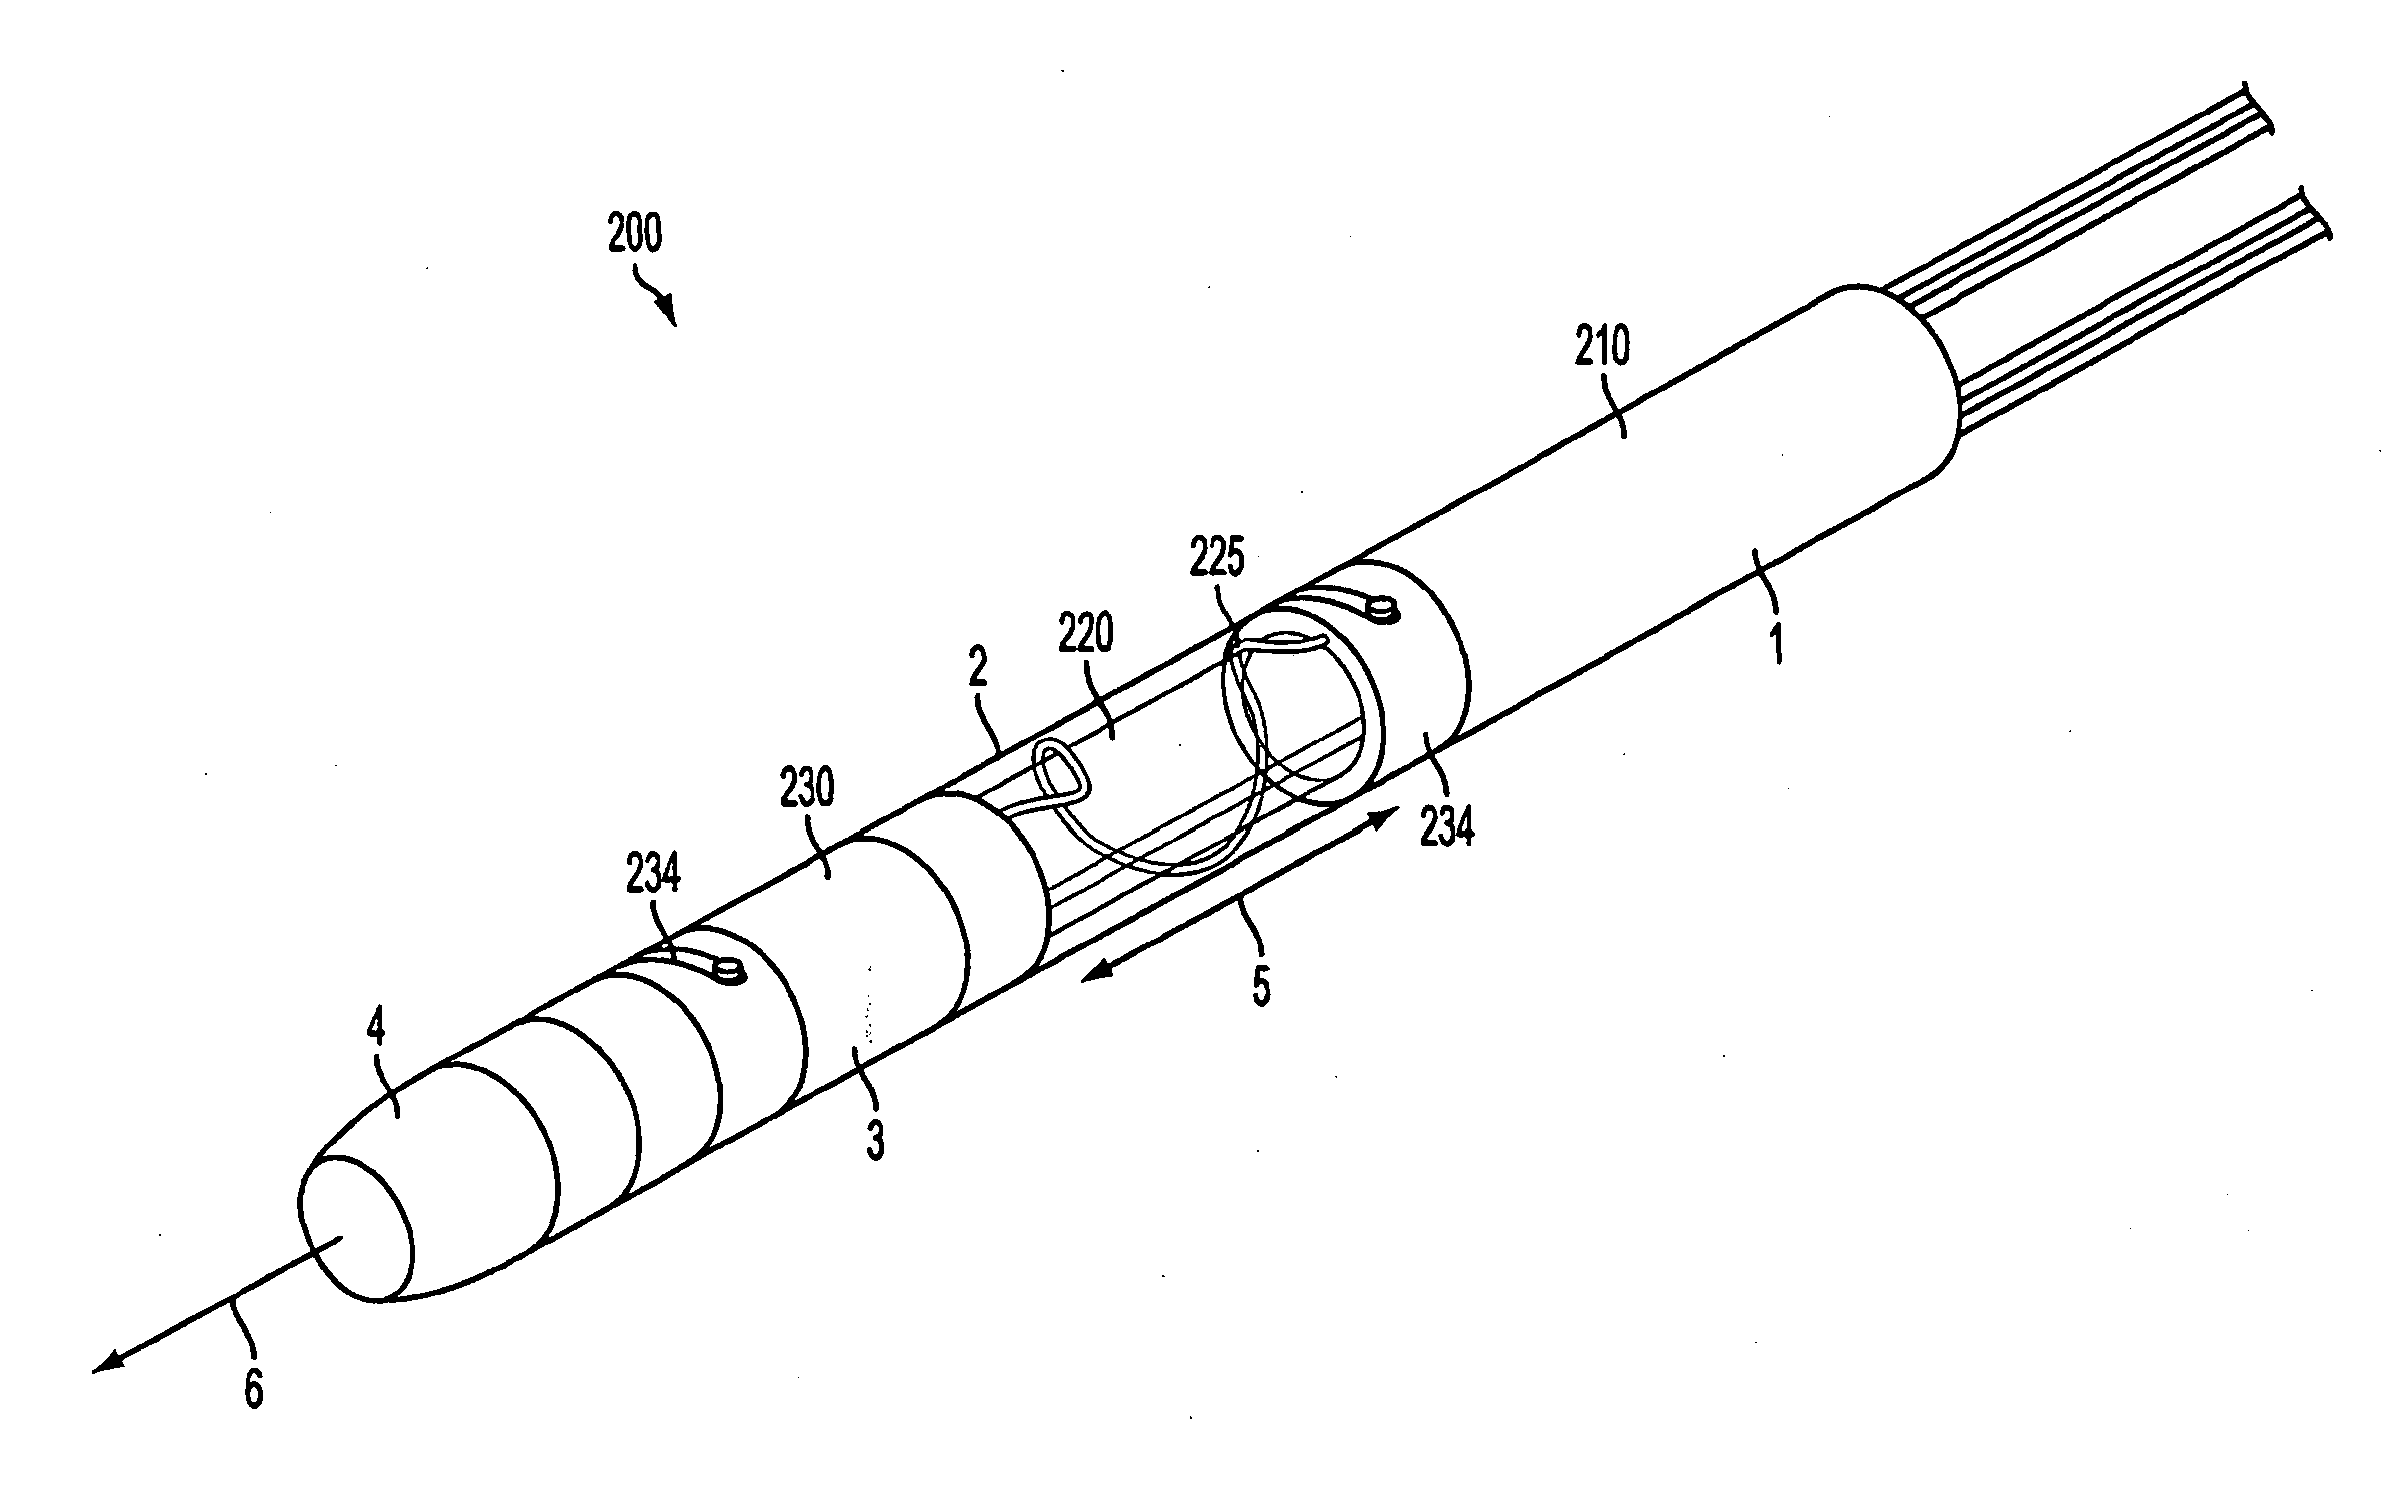 Lead extraction methods and apparatus